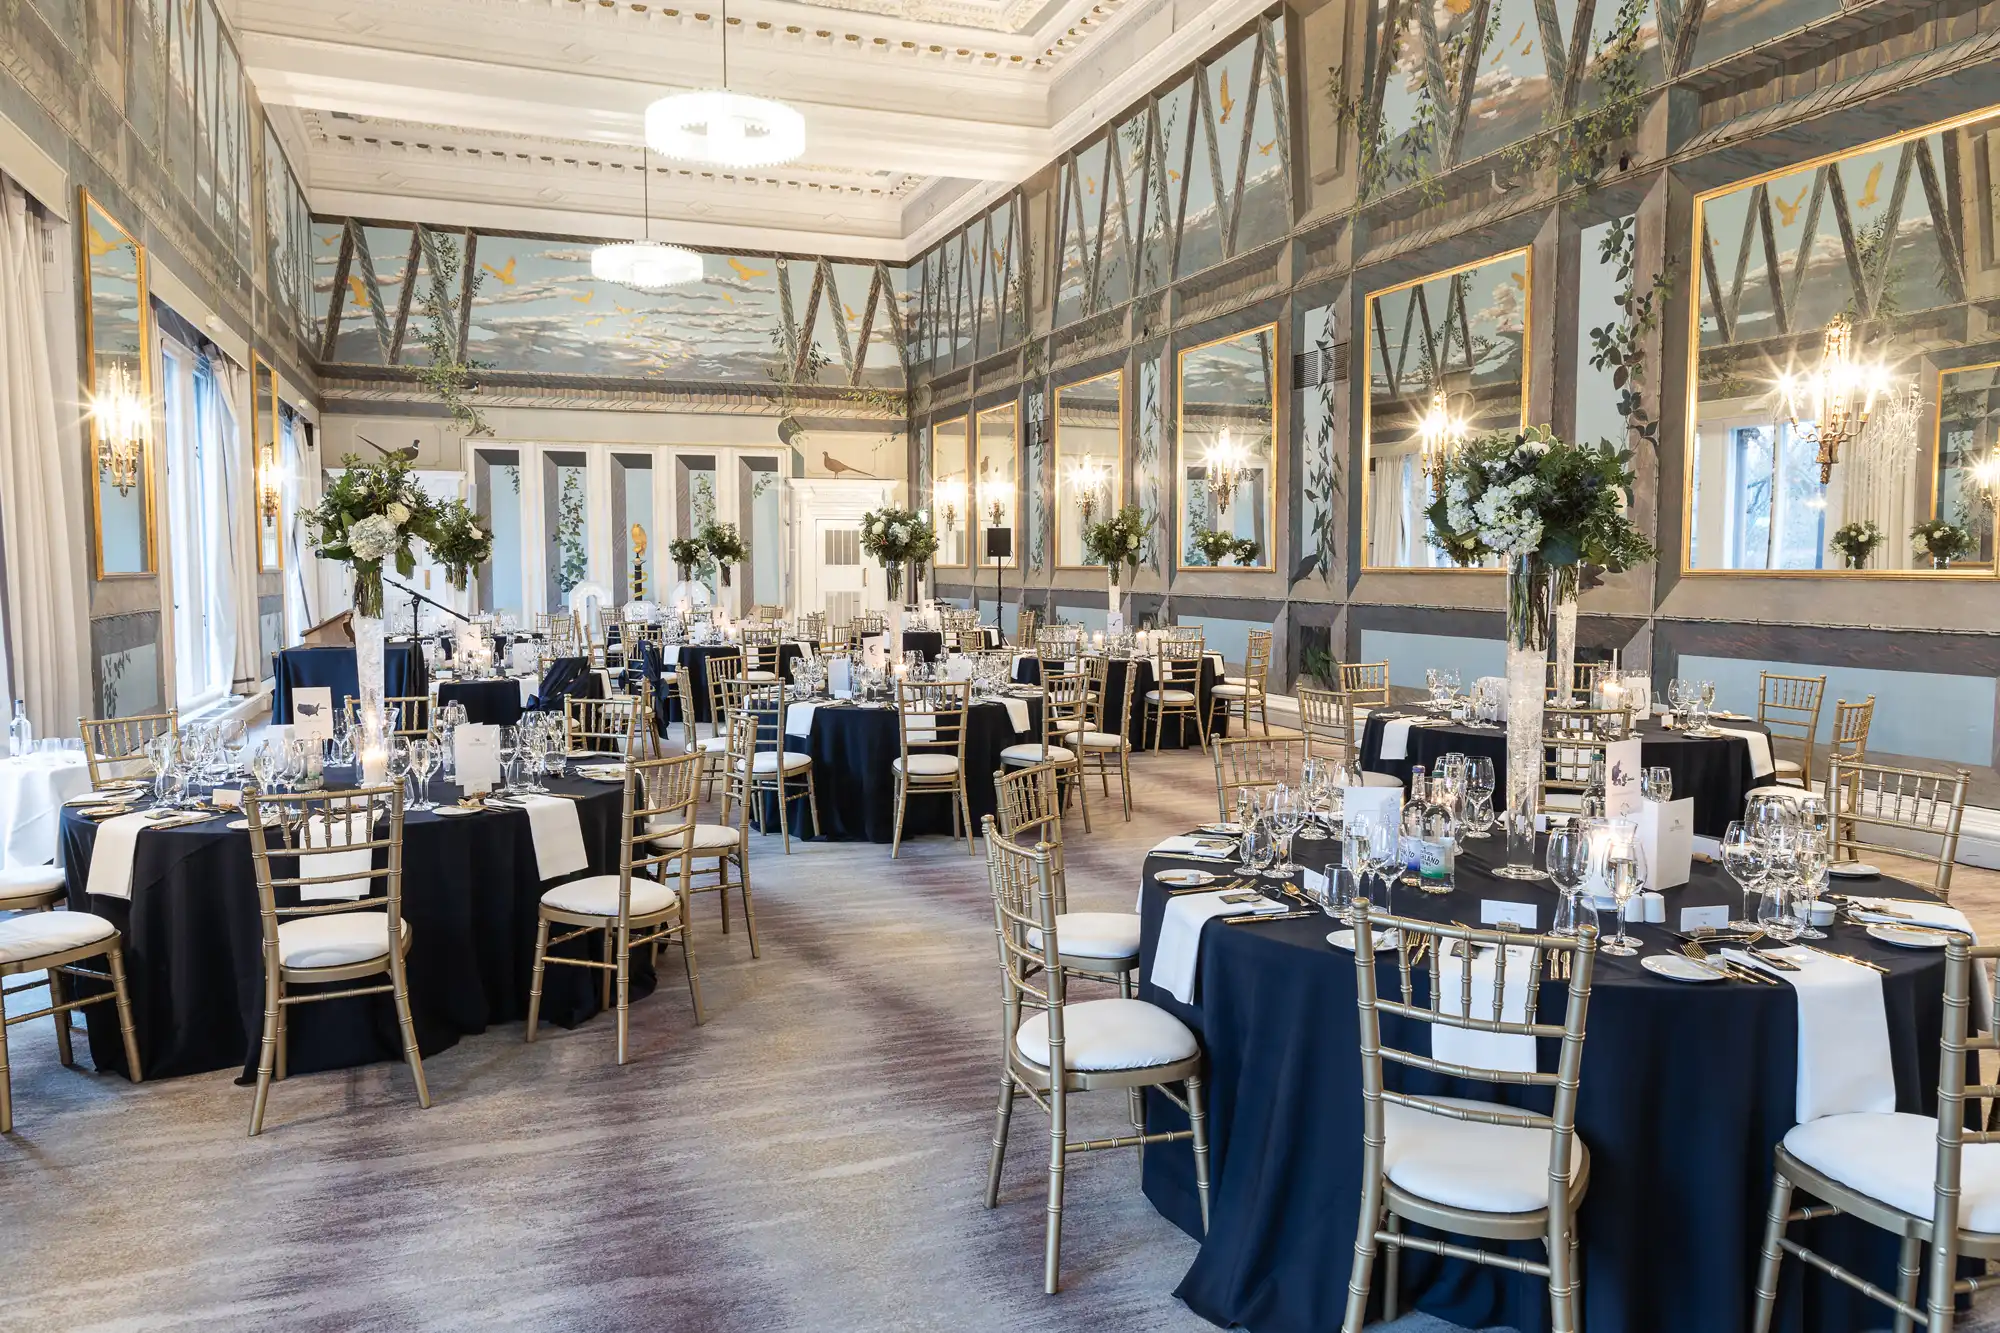 A formal dining room with elegantly set tables, white and black tablecloths, tall floral centerpieces, and gold chairs is prepared for an event. The walls are adorned with large mirrors and detailed murals.